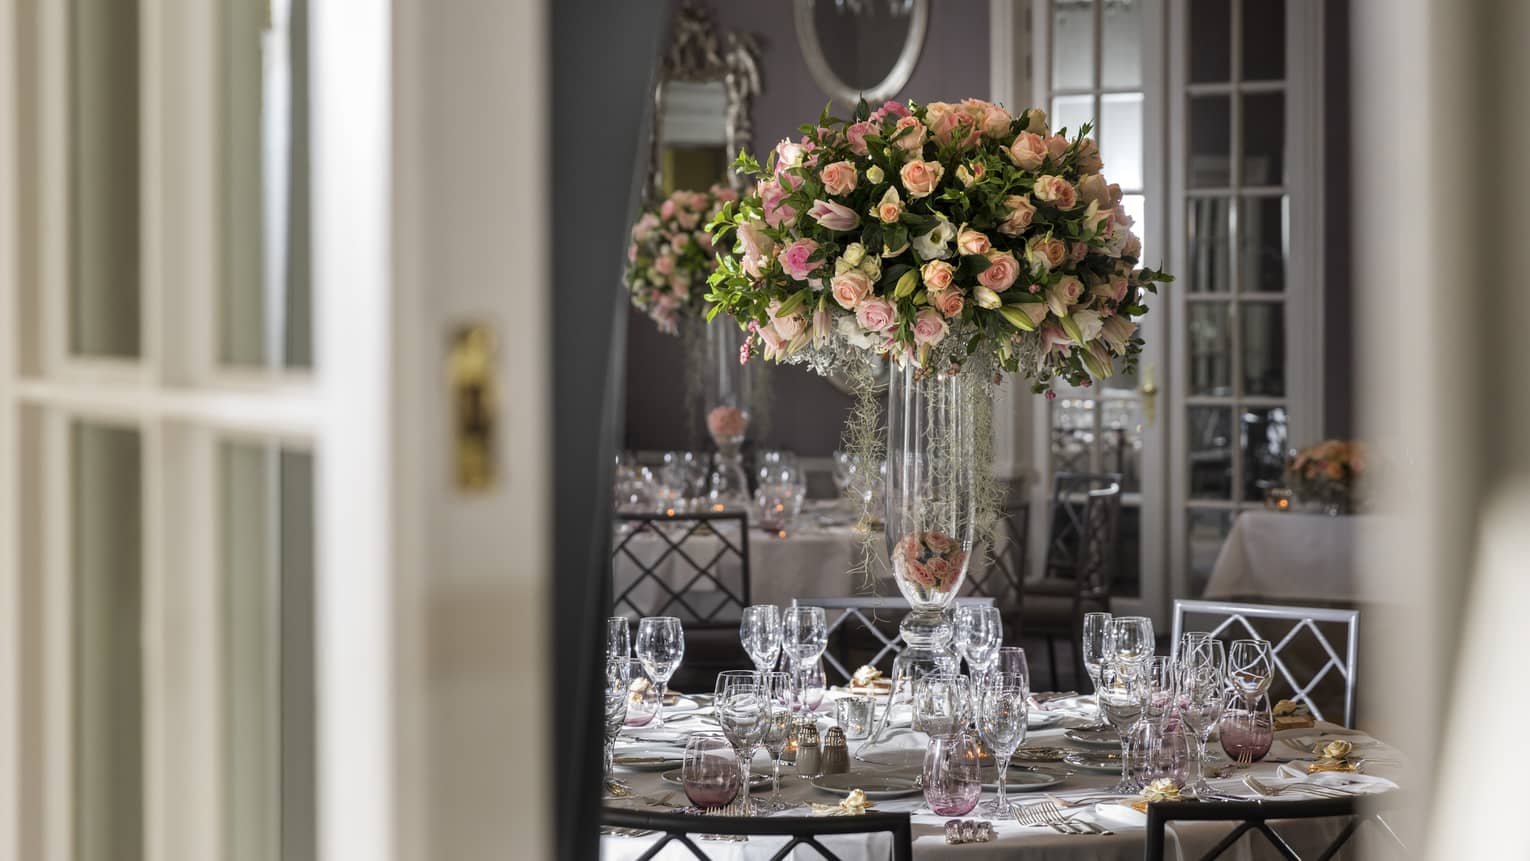 Arcadia Ballroom view through French doors to tall floral centrepiece on dining table with glassware